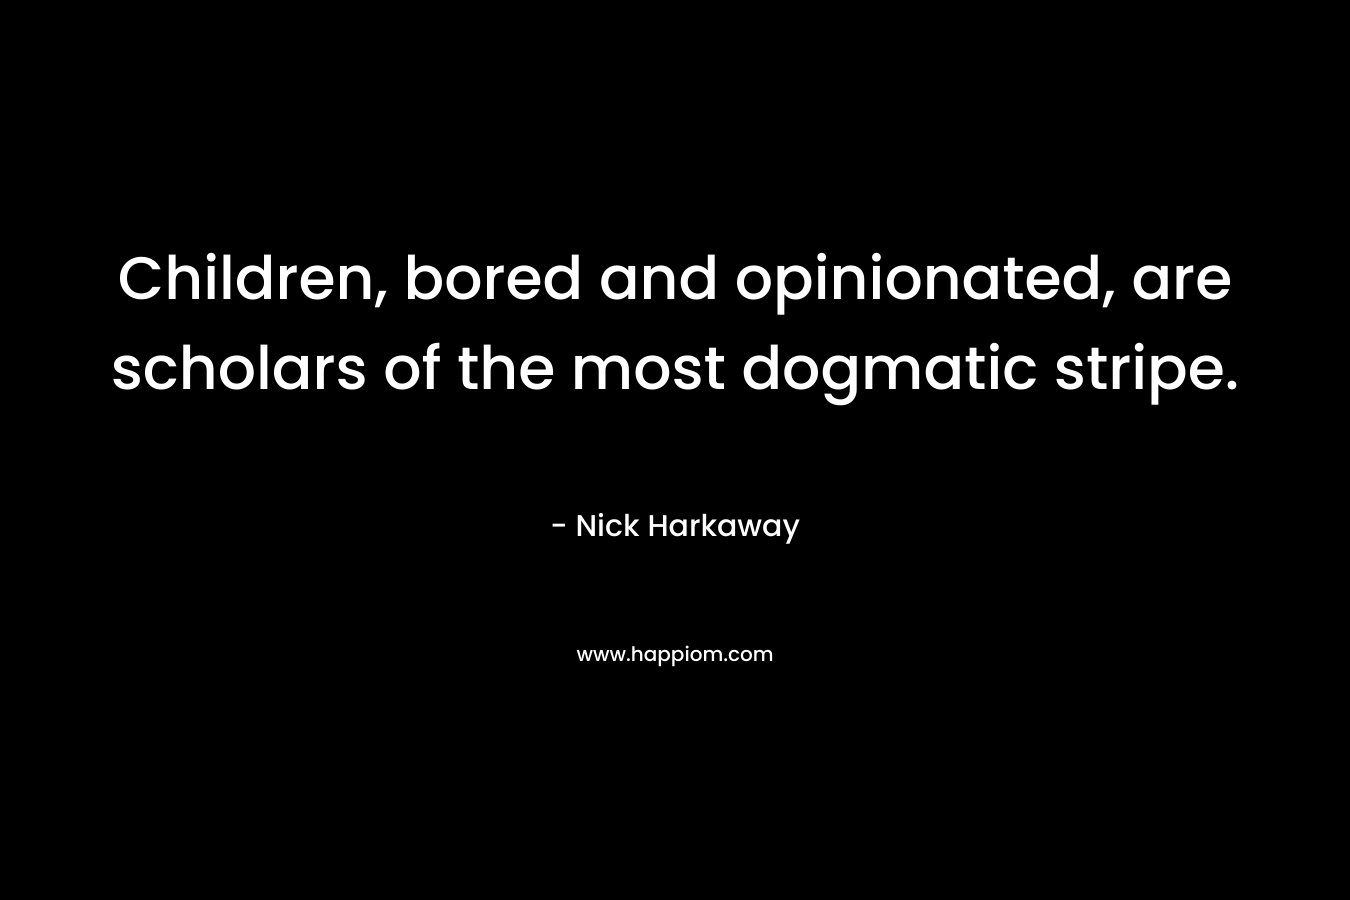 Children, bored and opinionated, are scholars of the most dogmatic stripe. – Nick Harkaway